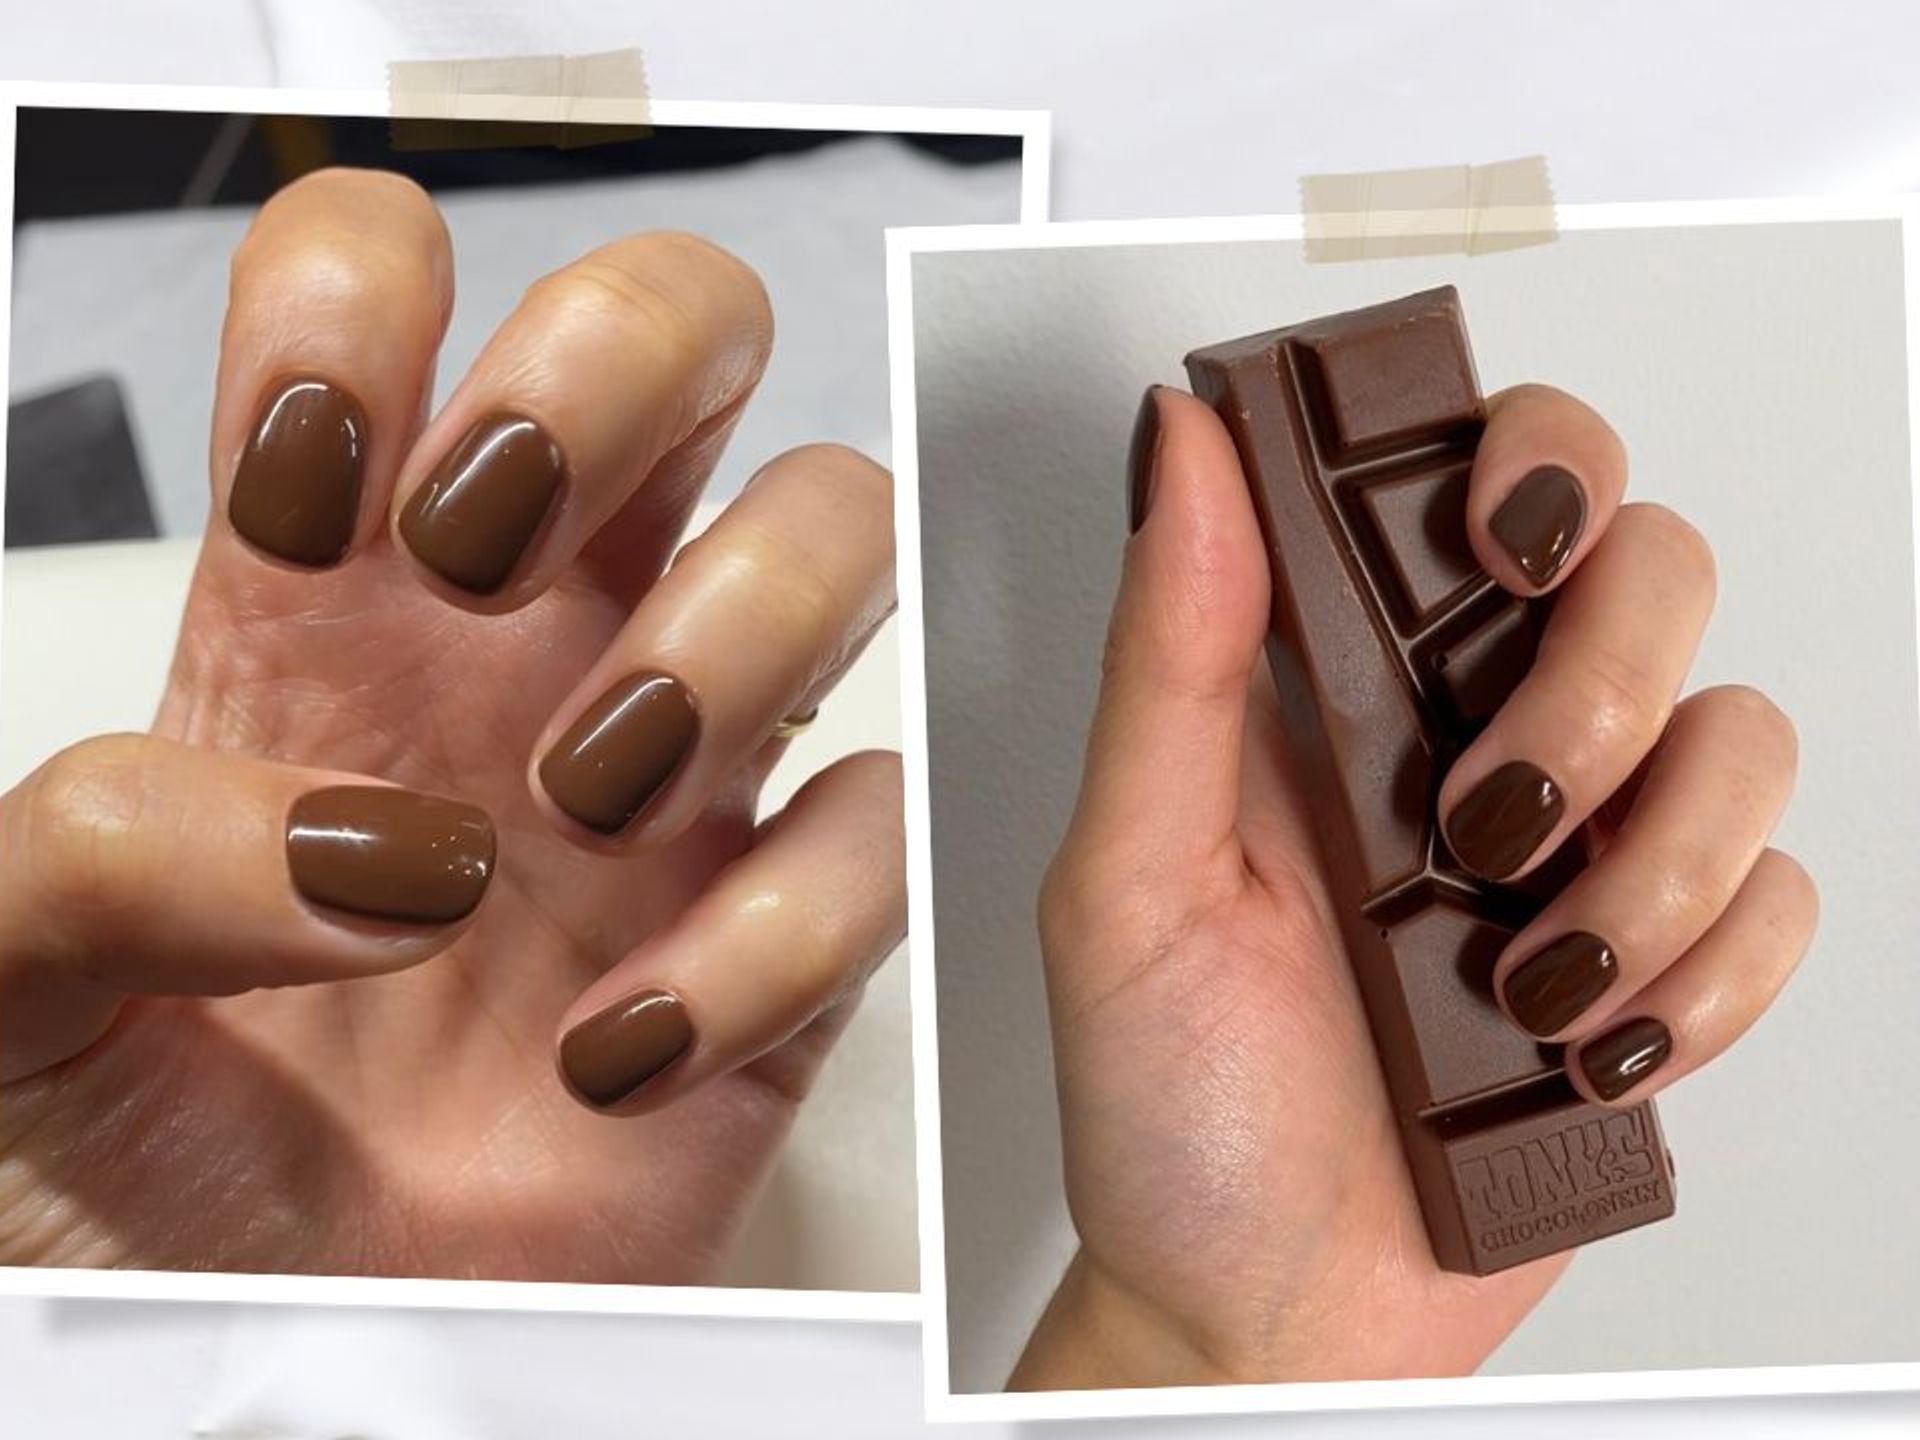 Dolce & Gabbana Chocolate Nail Lacquer - The Beauty Look Book